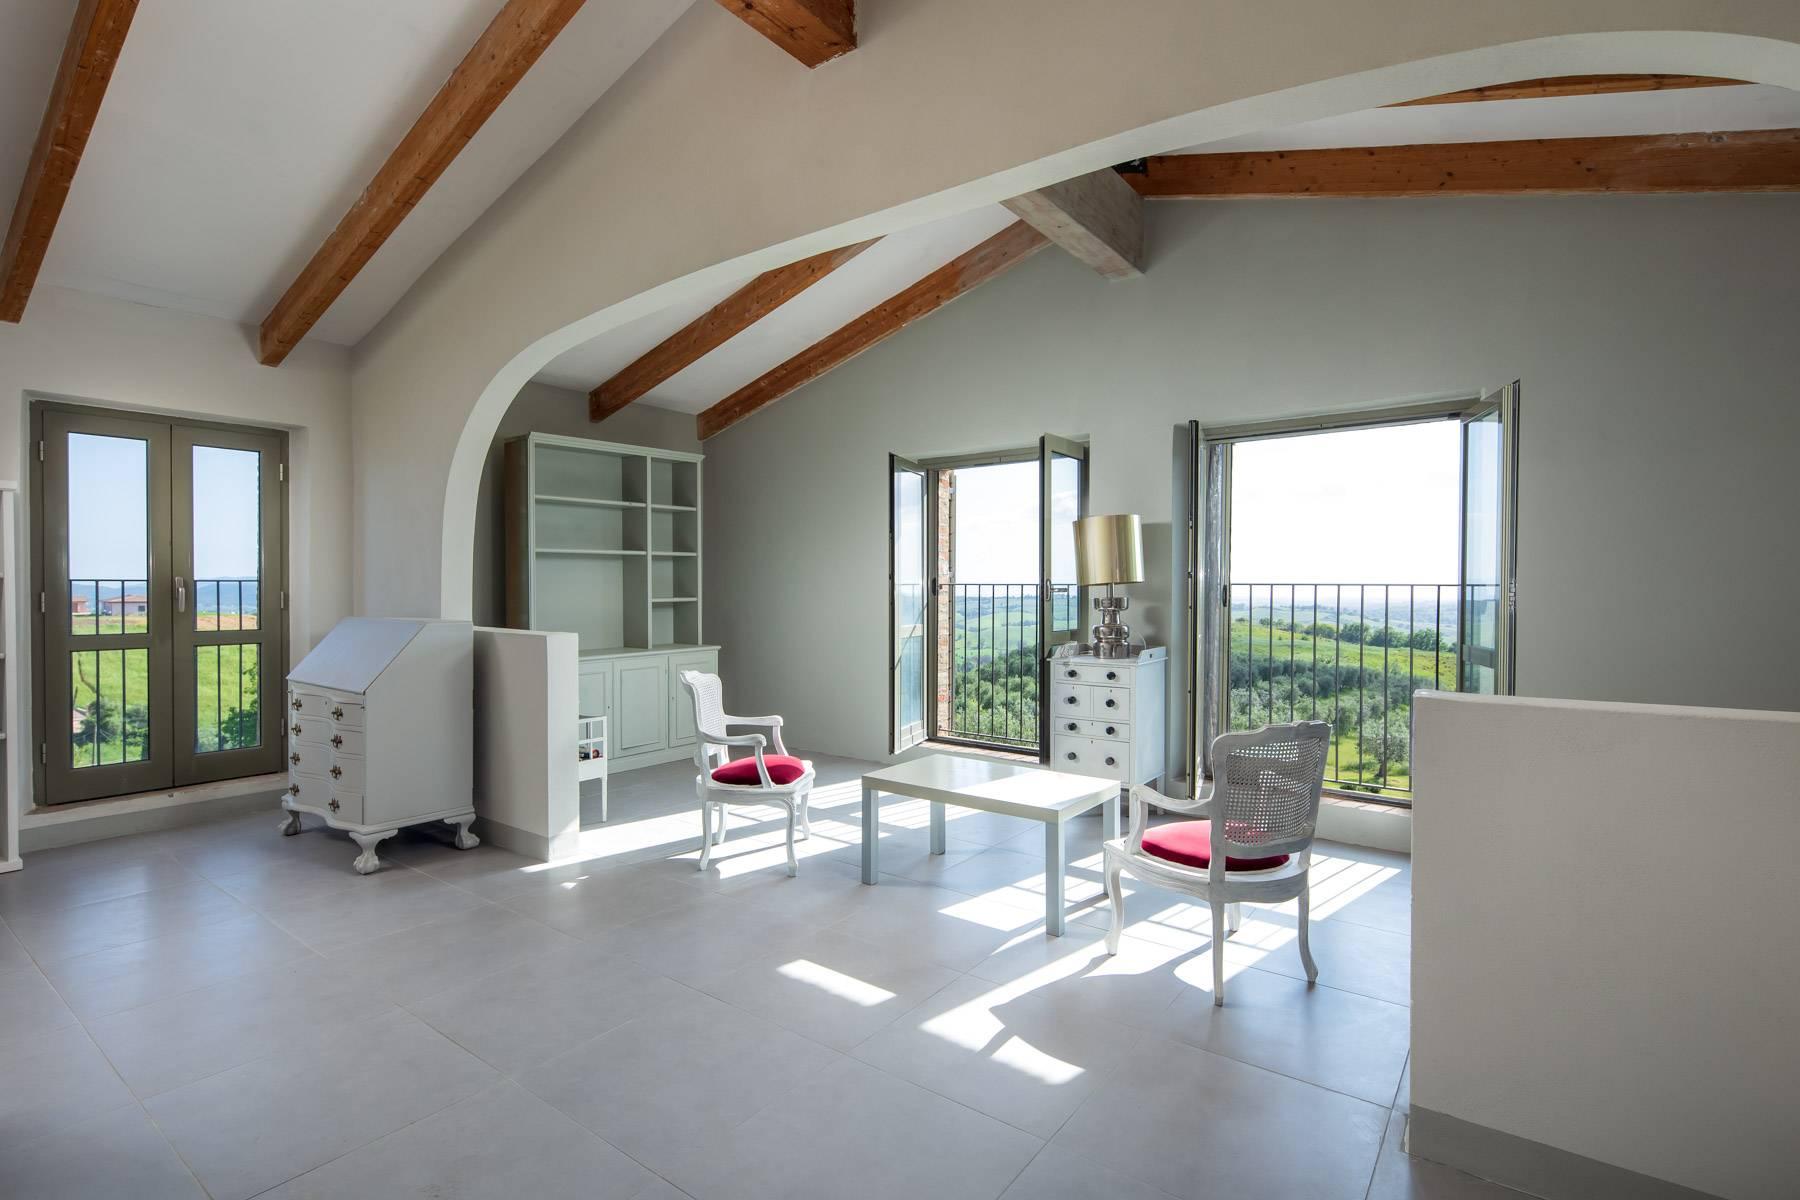 Top location overlooking Argentario and Giglio island - 15